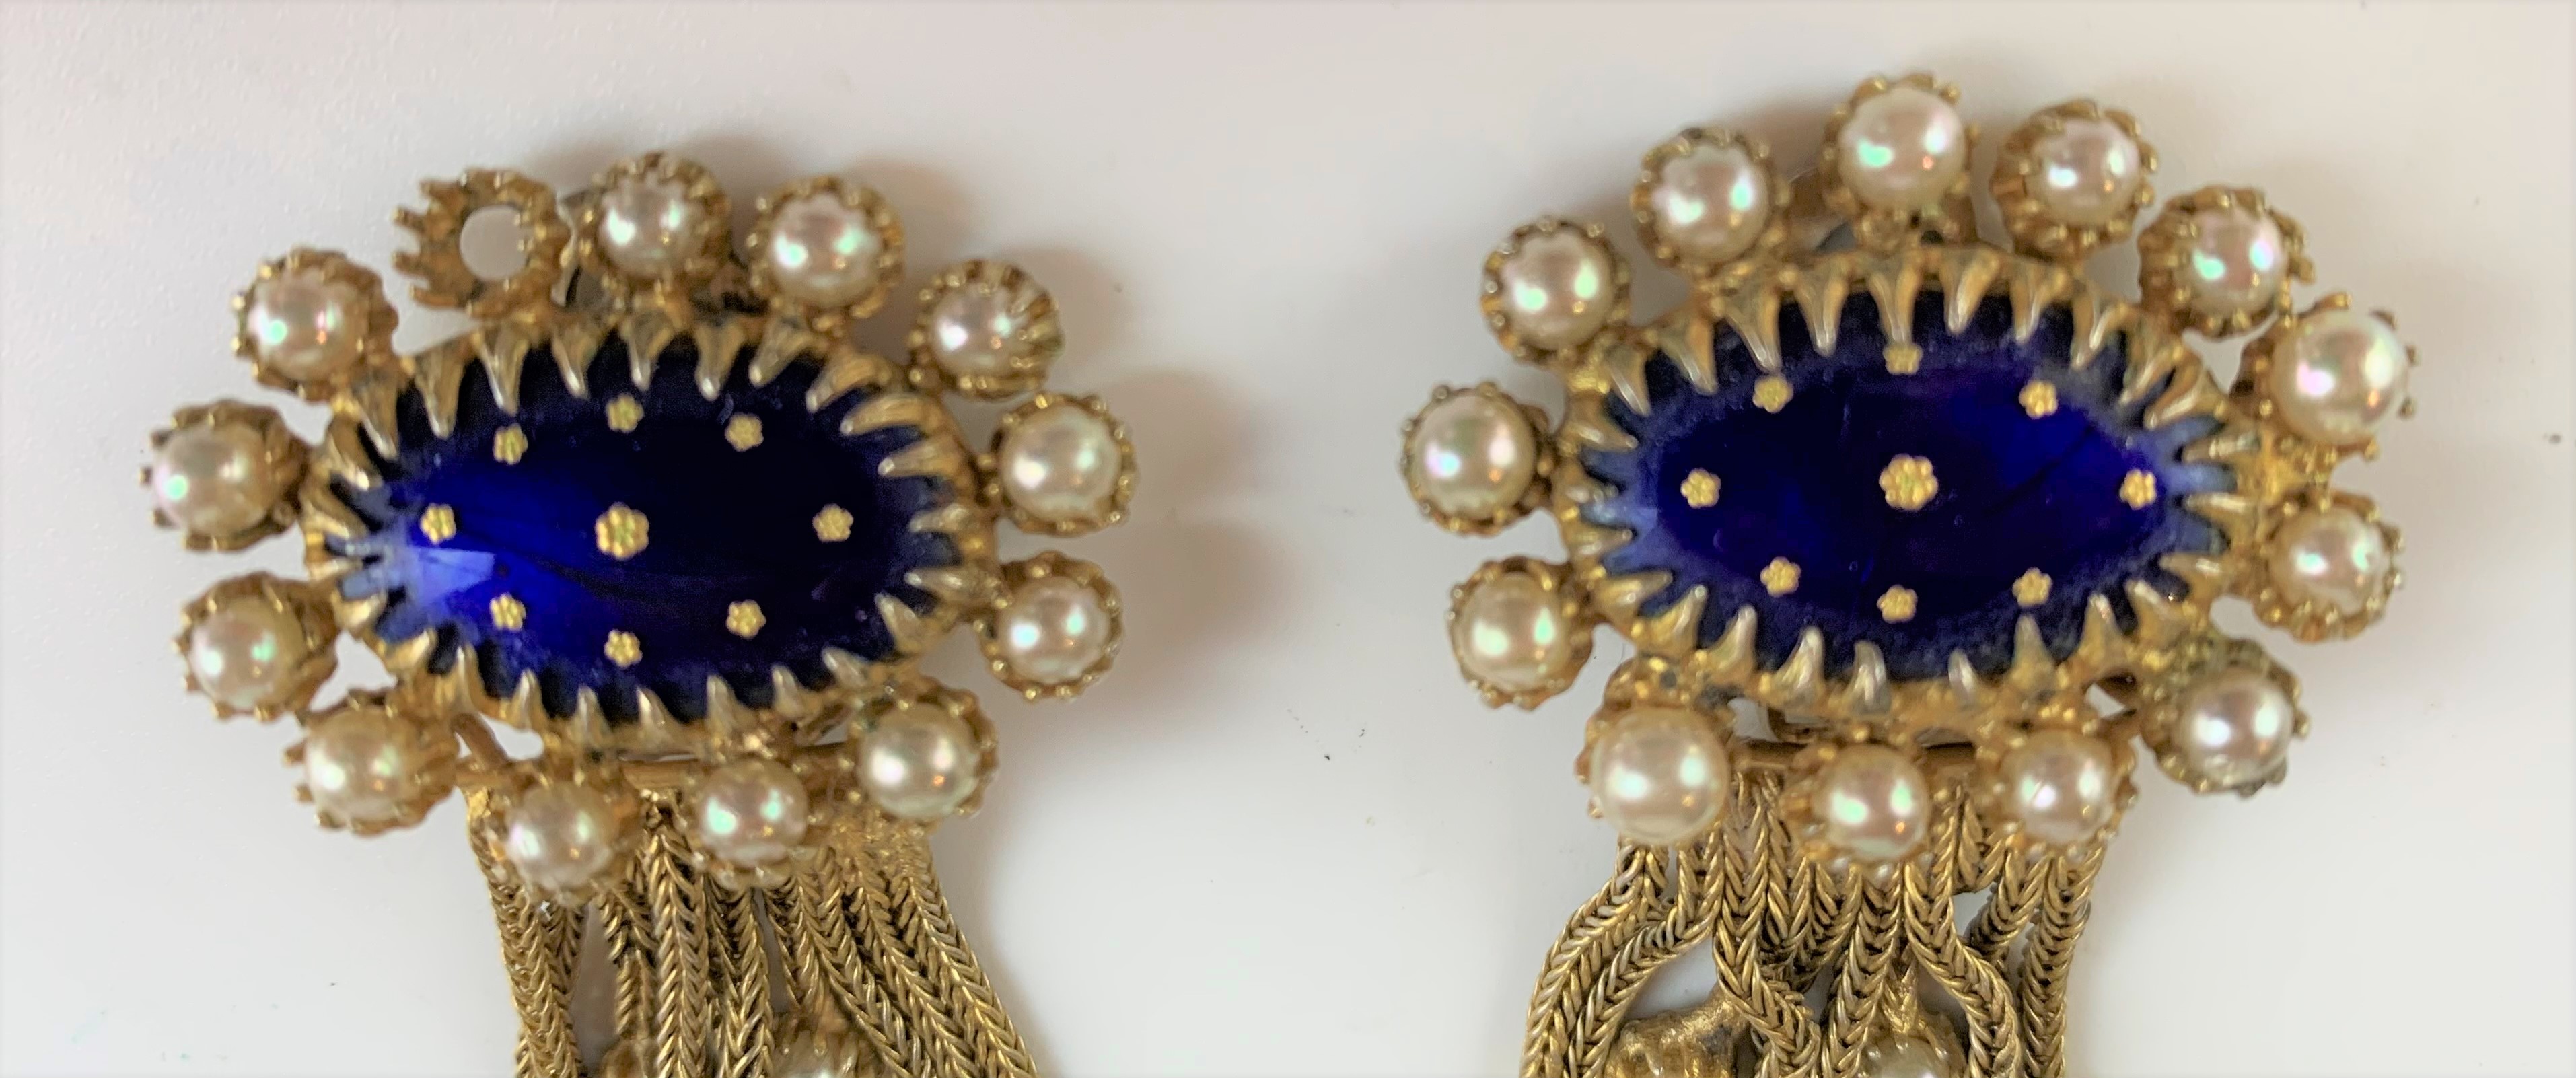 Pair of Christian Dior earrings by Michel Maer (1 pearl missing) - Image 3 of 6